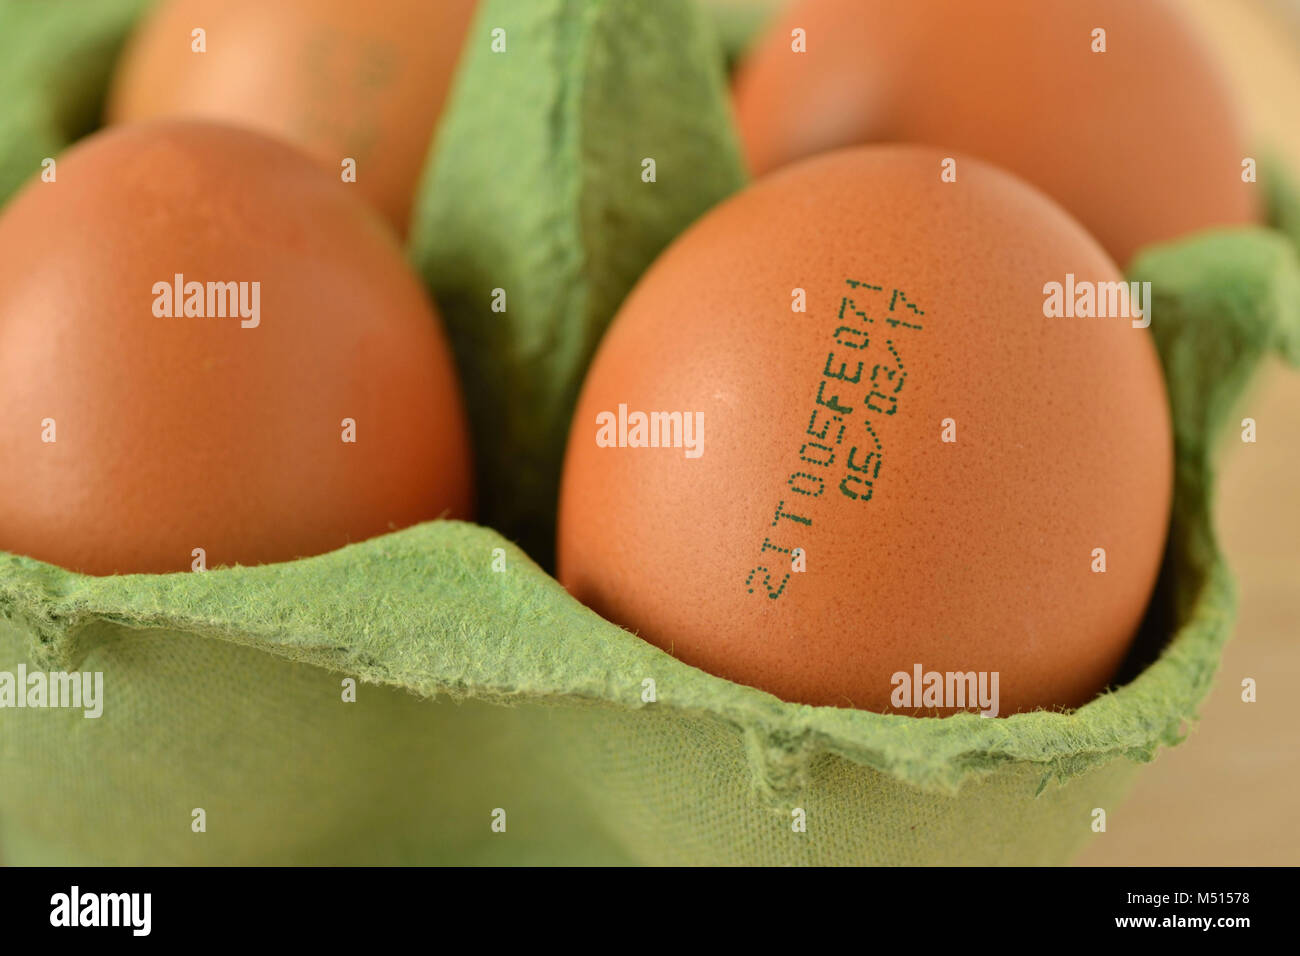 Batch of eggs with expiration date stamp, on egg carton Stock Photo - Alamy